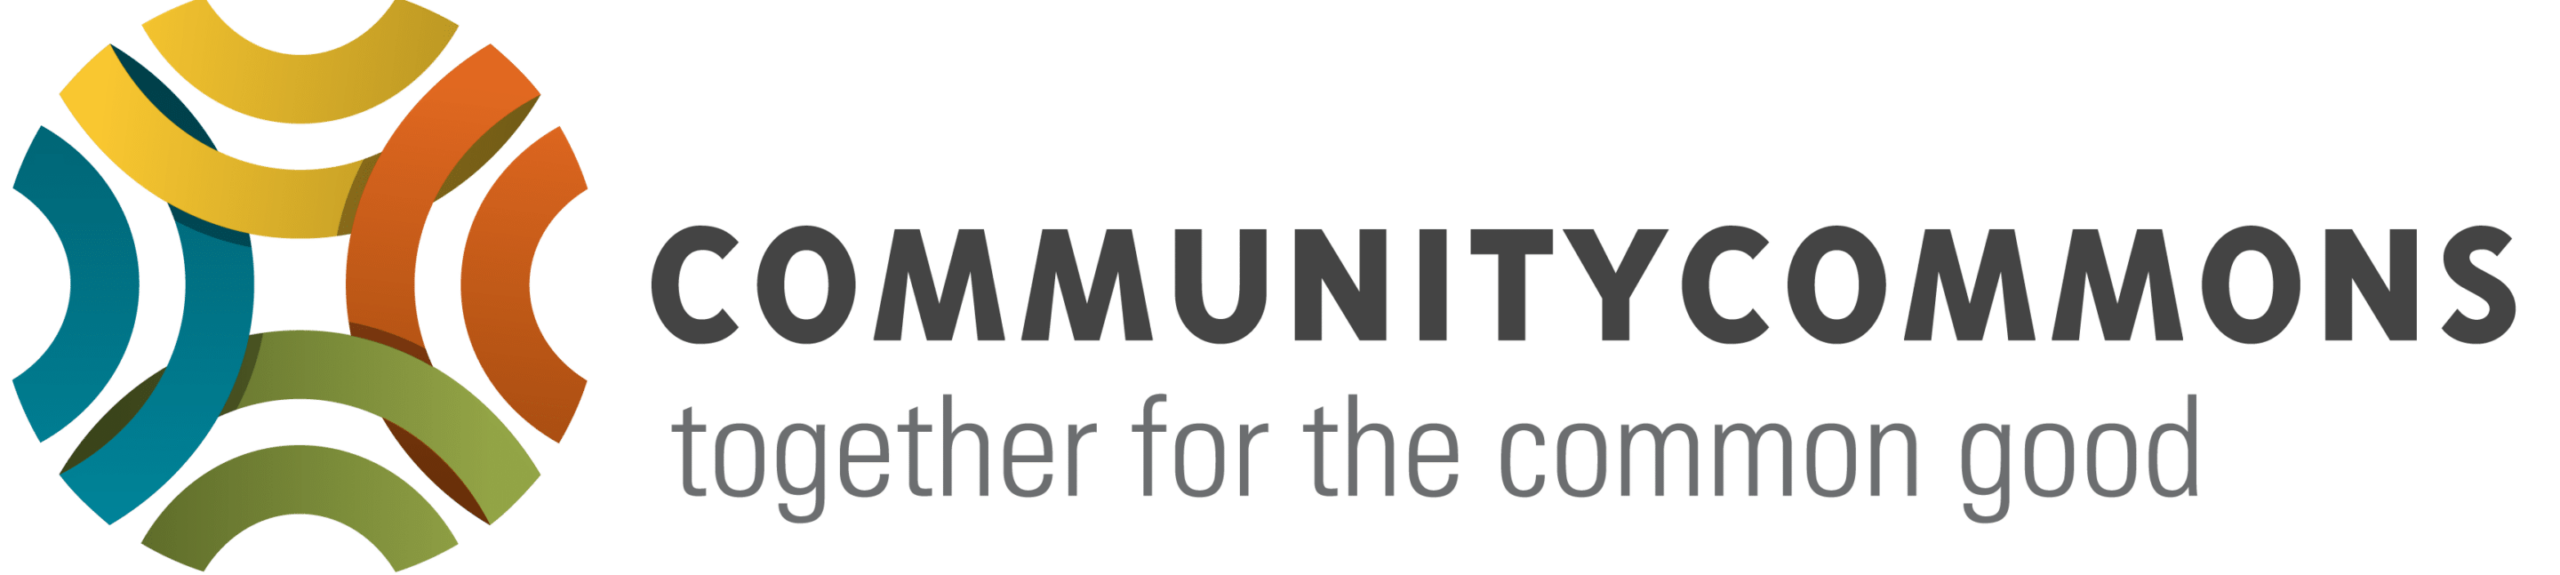 Community Commons Logo & Tagline: Together for the Common Good